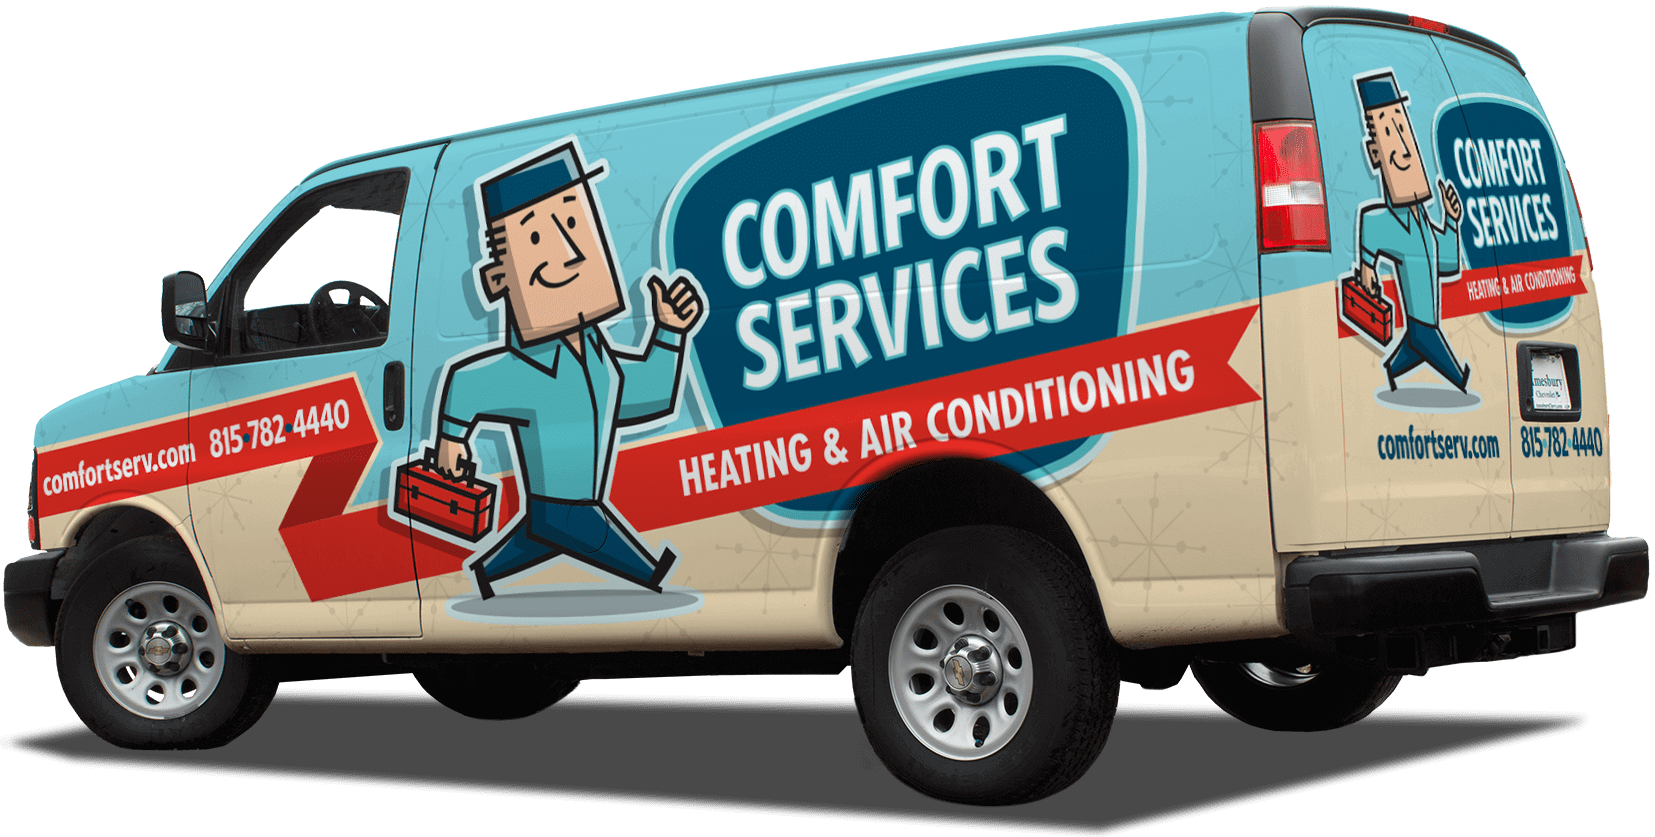 See what makes Comfort Services Heating & Air Conditioning your number one choice for Cooling repair in Naperville IL.